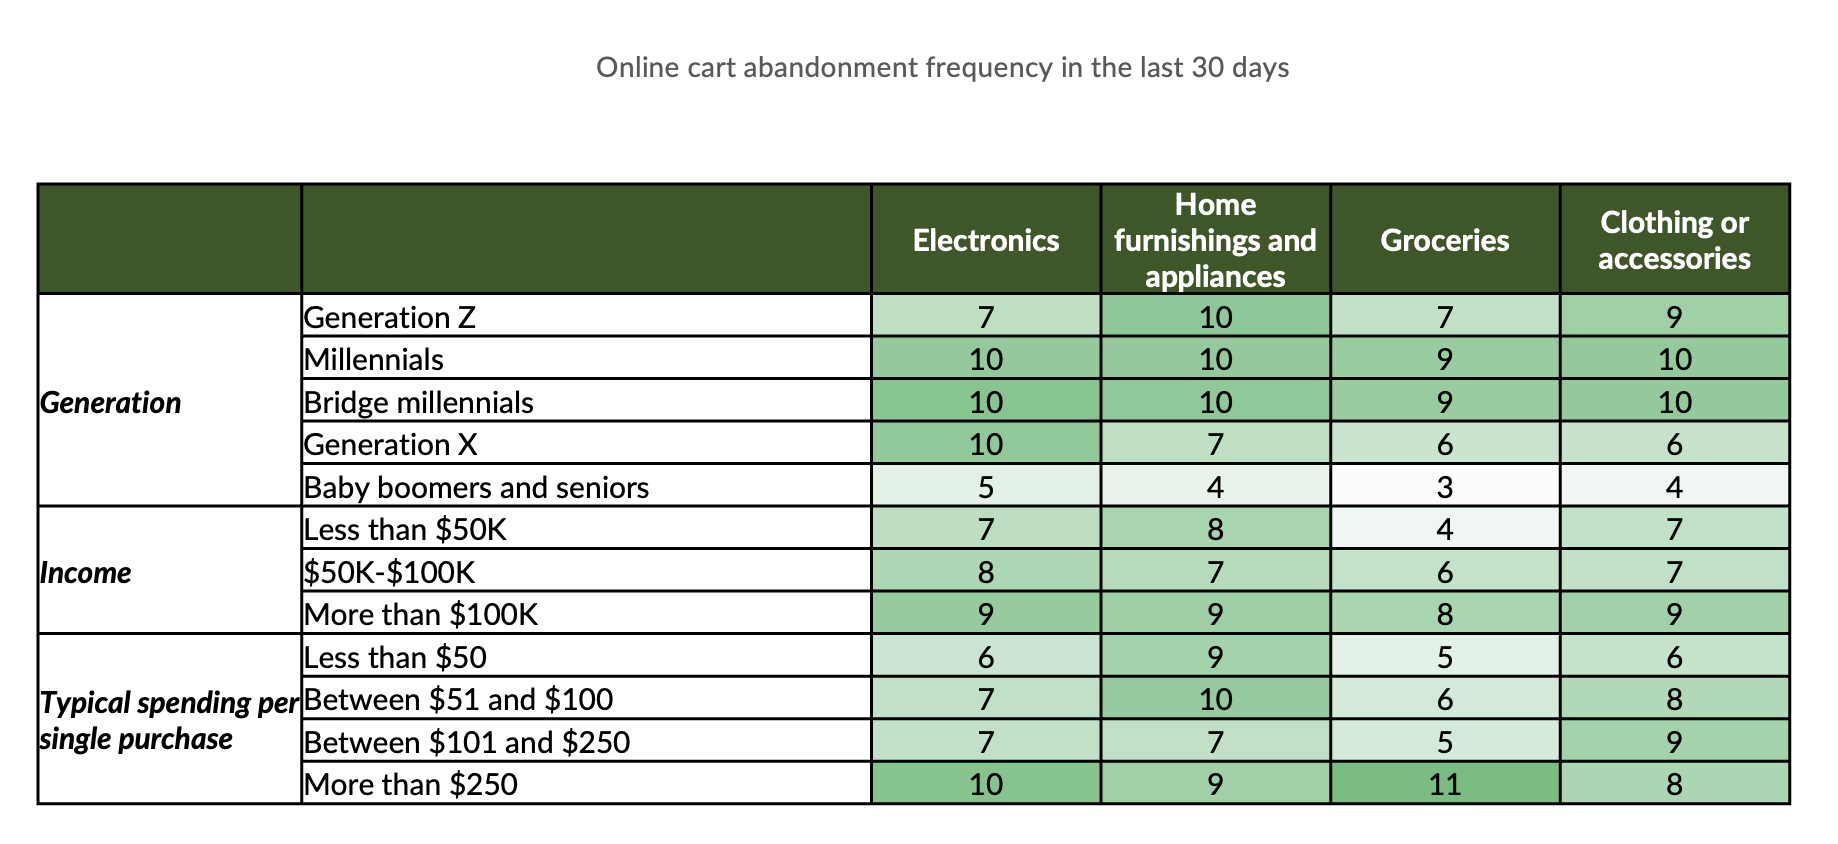 Online cart abandonment frequency